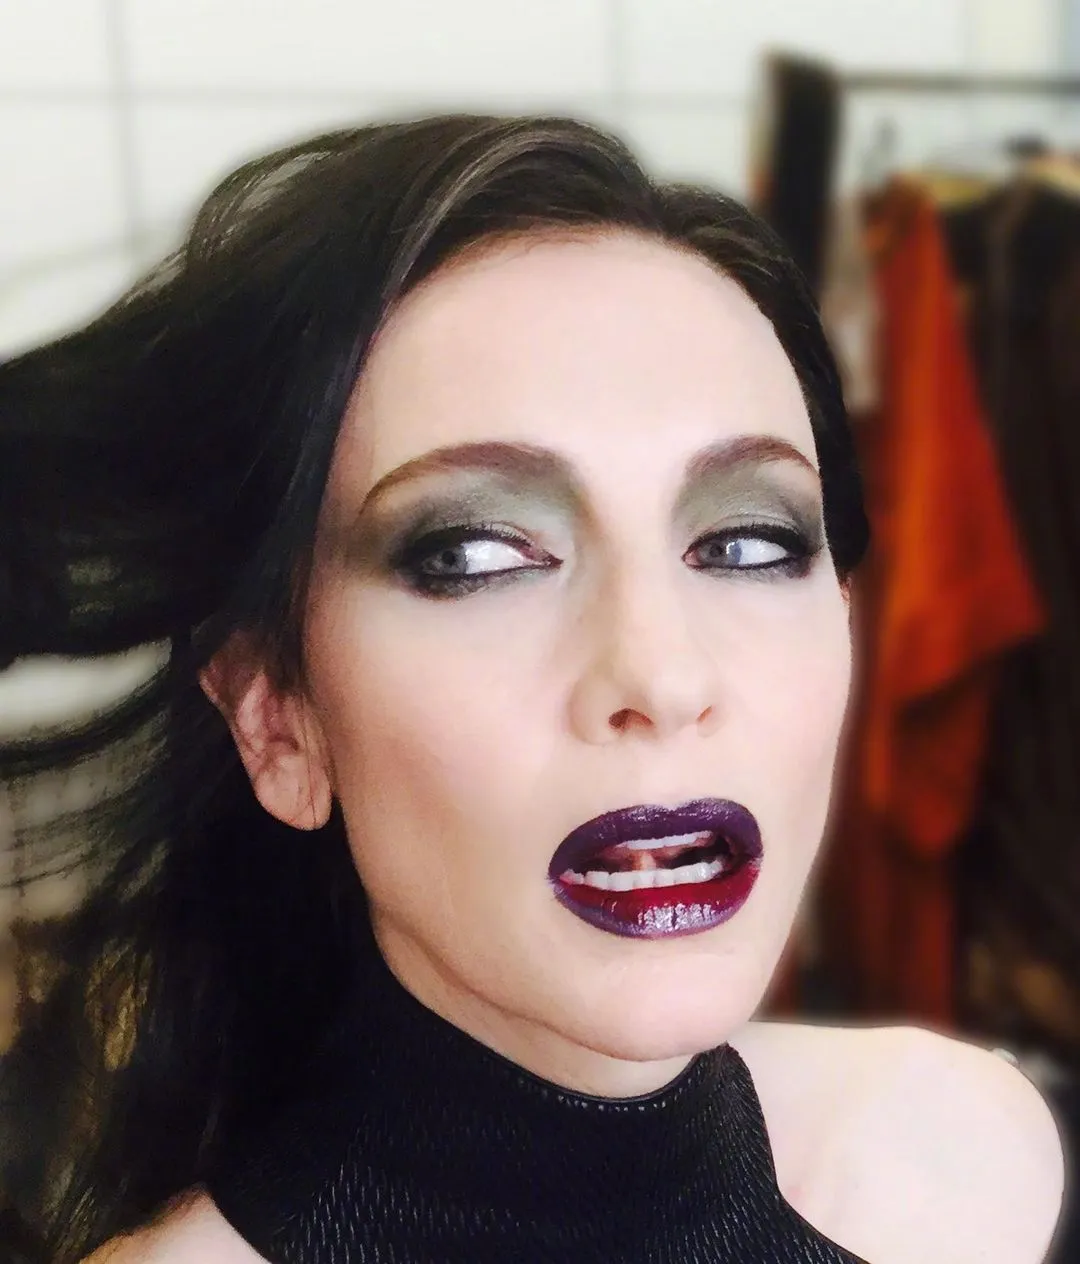 Makeup Test by Cate Blanchett as Hela | FMV6